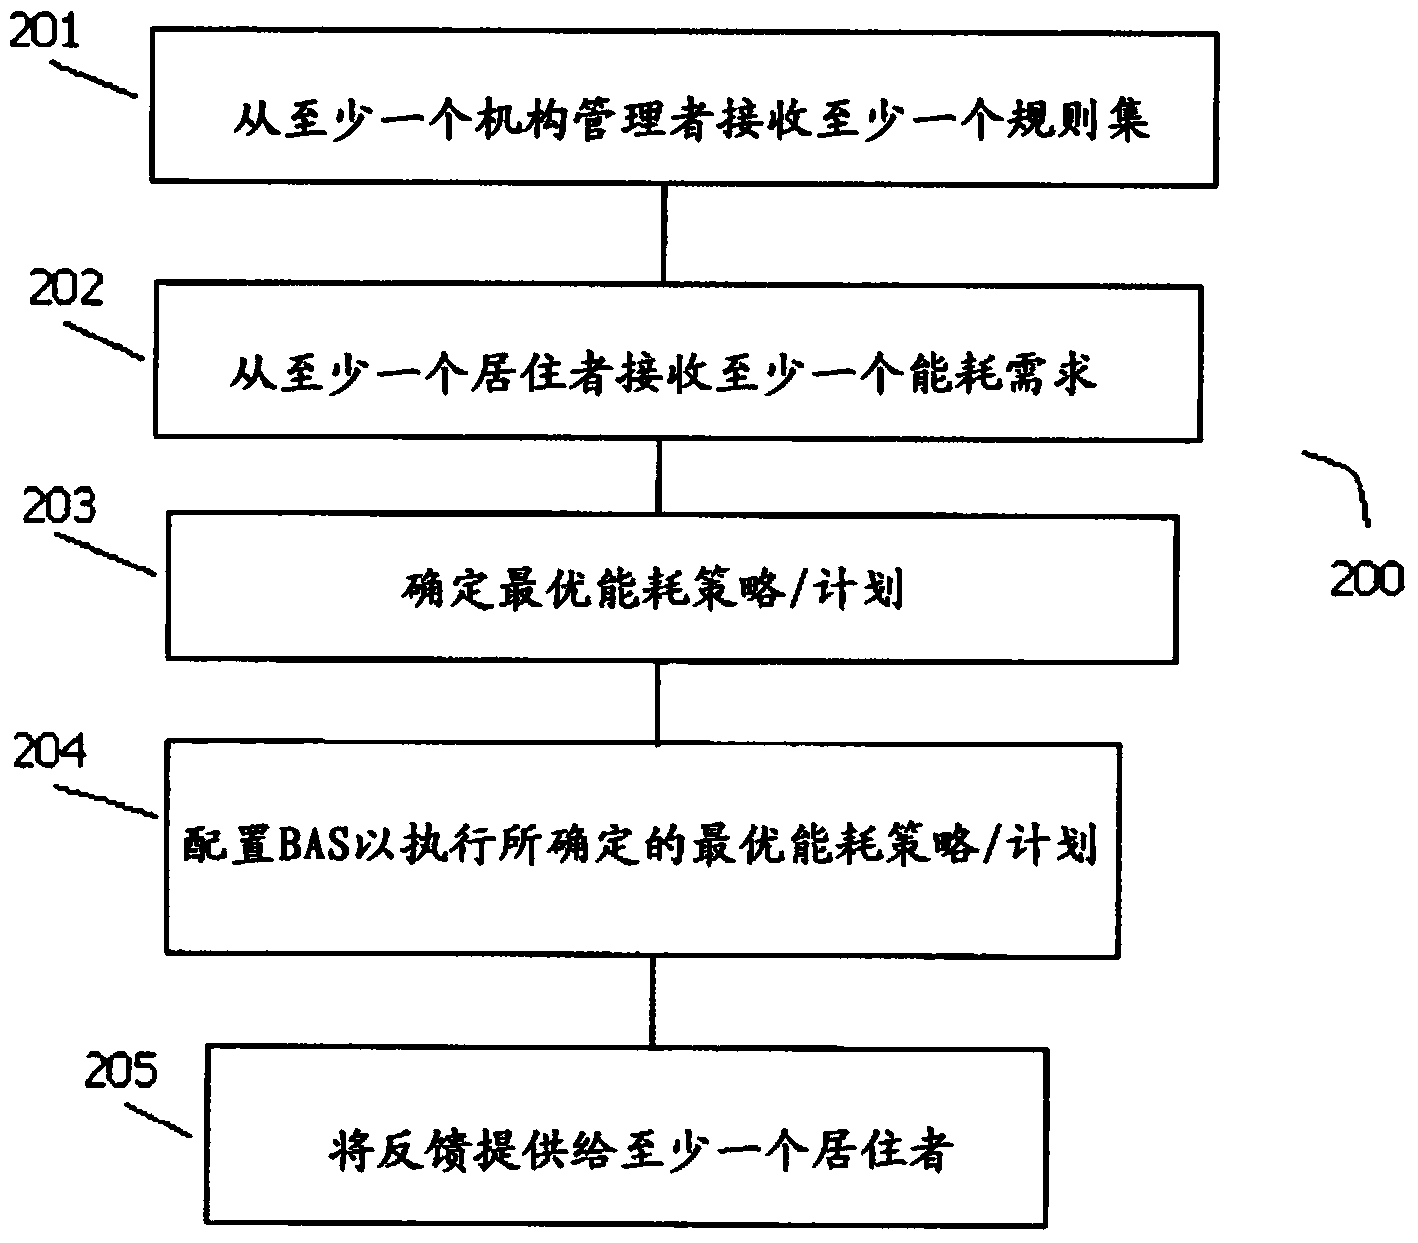 Method and system for energy efficient collaborative high performance building control